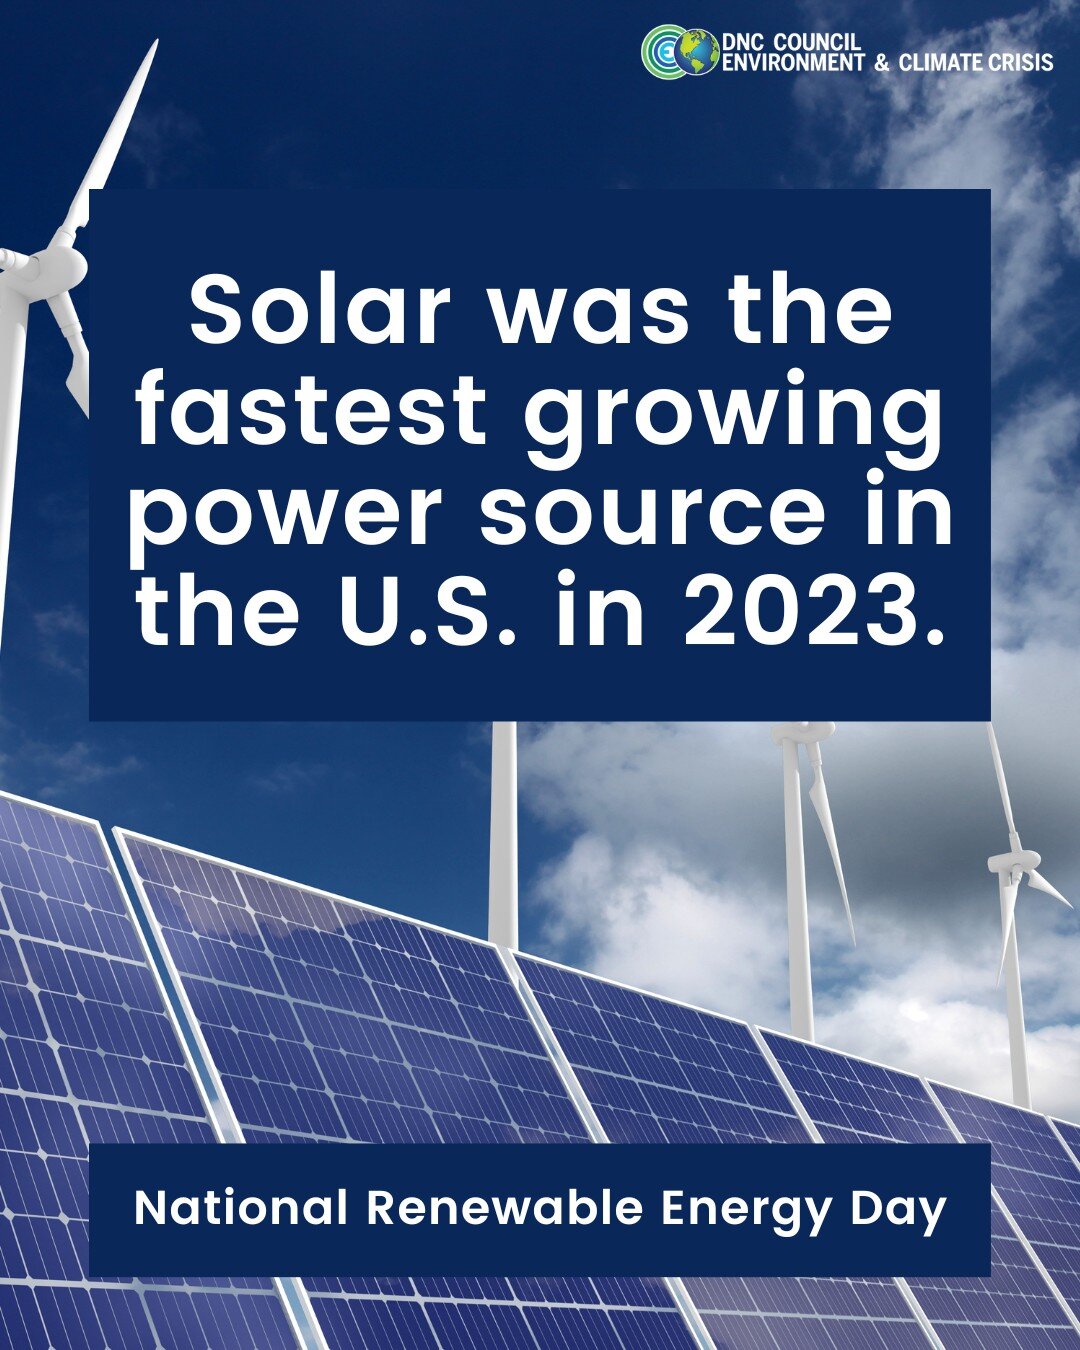 National #RenewableEnergy Day was this week, and the U.S. has a lot to be proud of thanks to President @JoeBiden. With historic investments in clean energy manufacturing and more, the solar power industry grew faster than any other power source!
.
.
